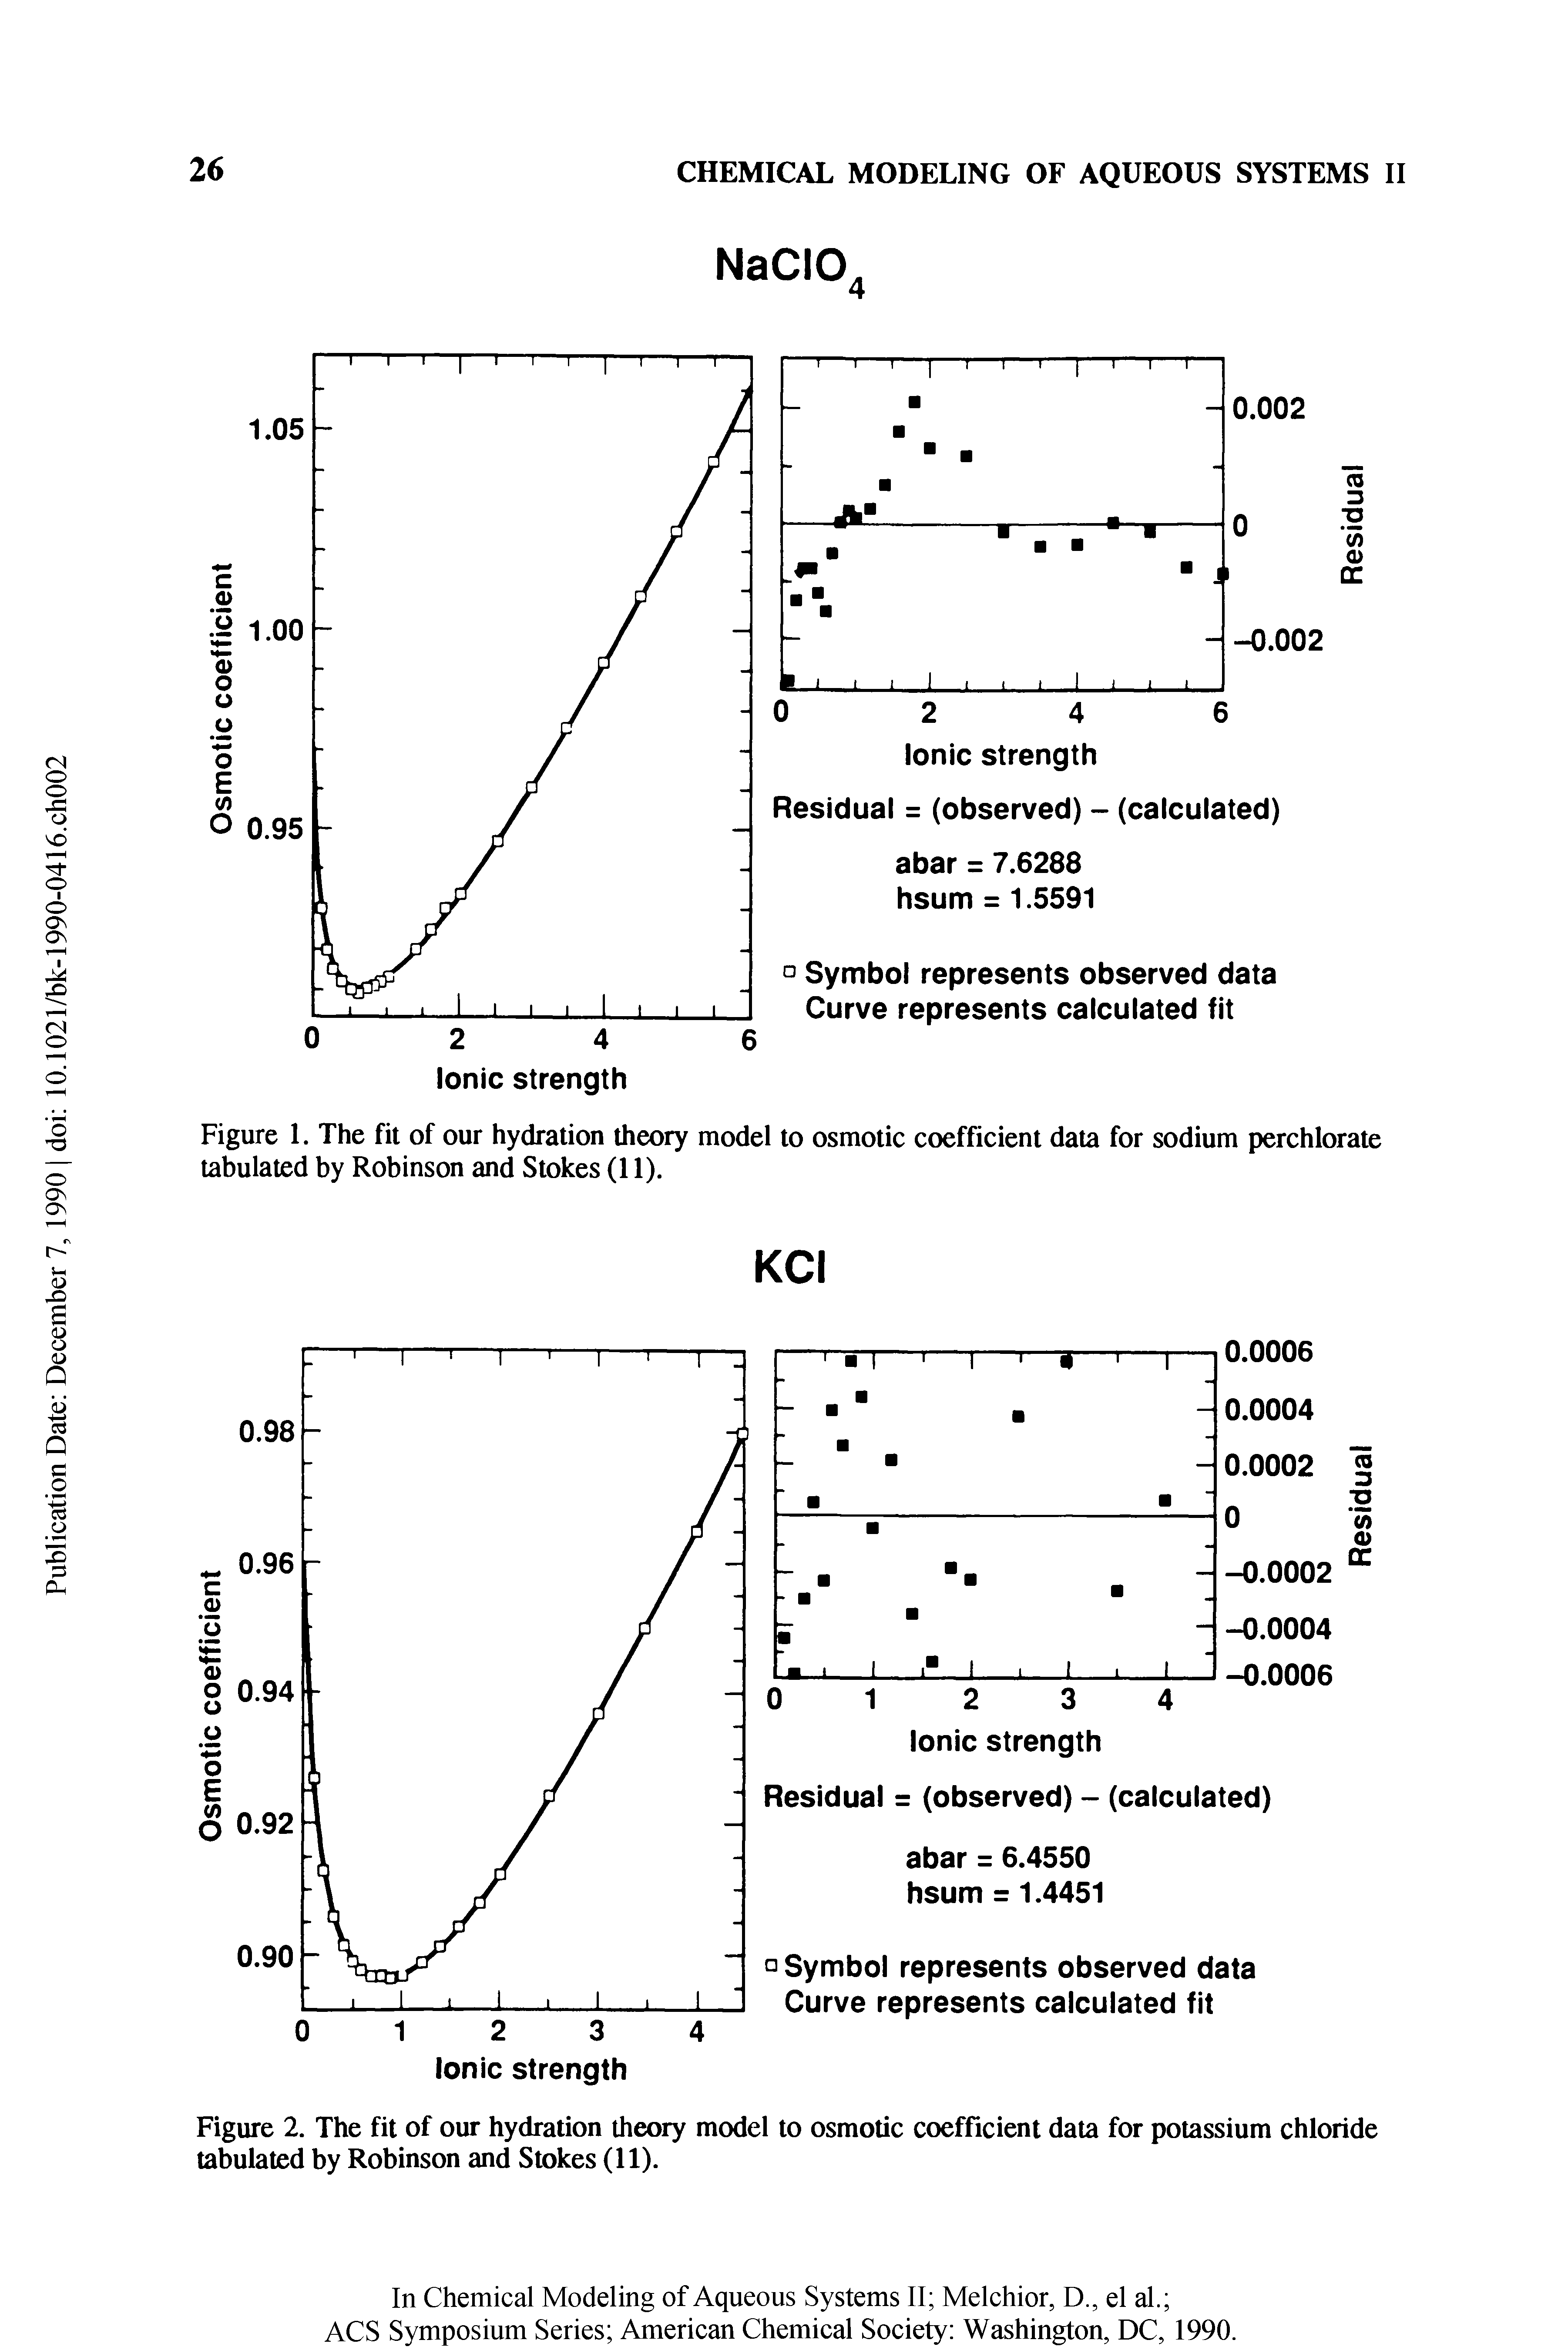 Figure 1. The fit of our hydration theory model to osmotic coefficient data for sodium perchlorate tabulated by Robinson and Stokes (11).